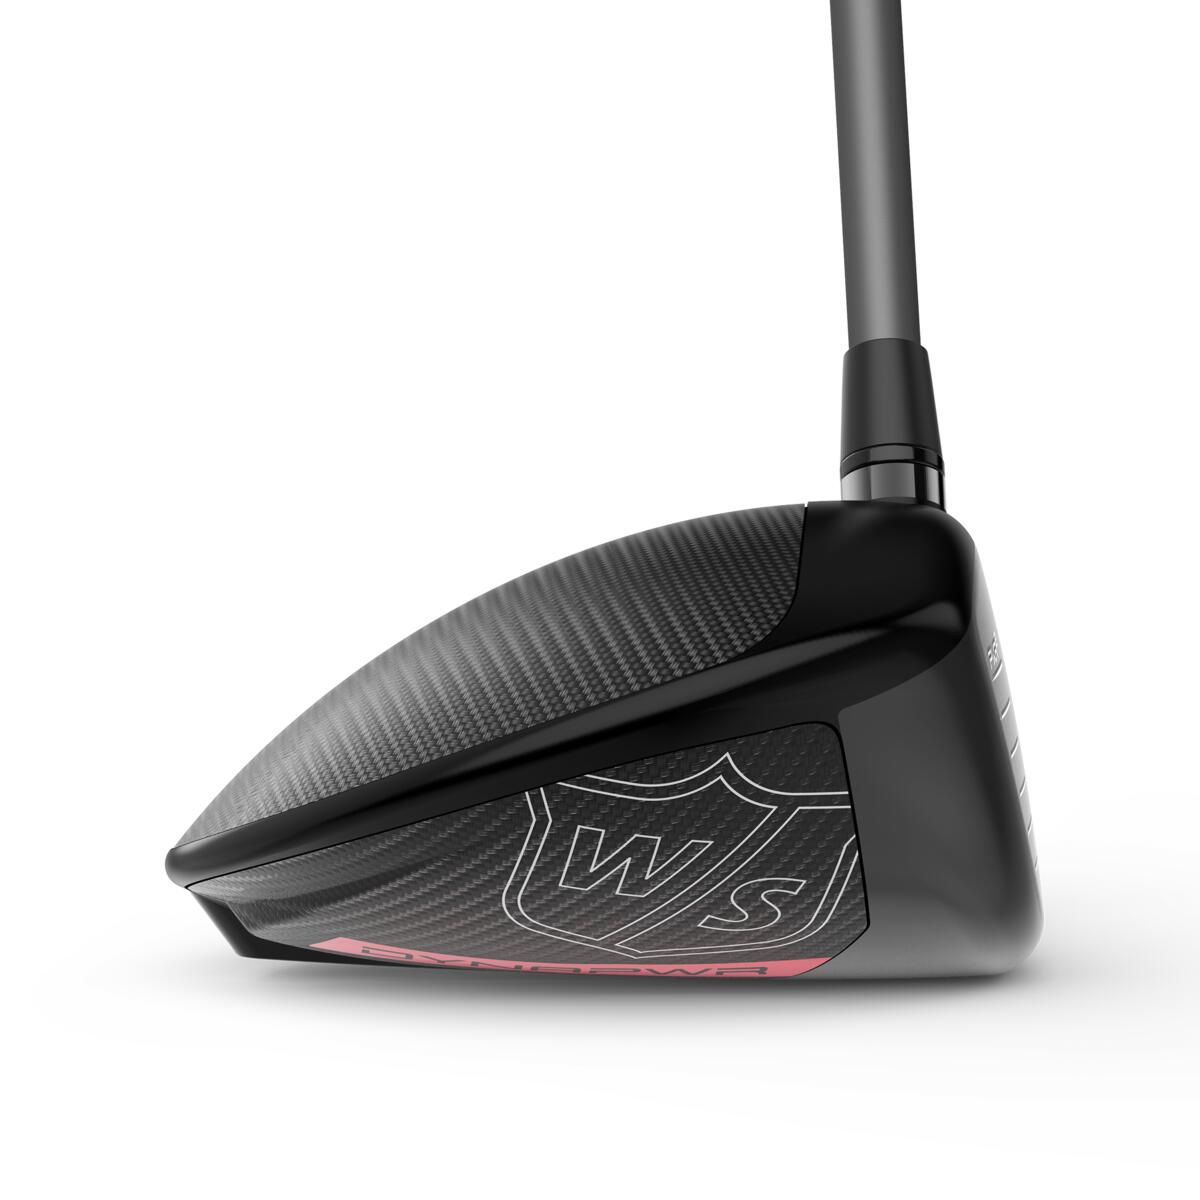 Wilson Dynapwr Carbon Driver